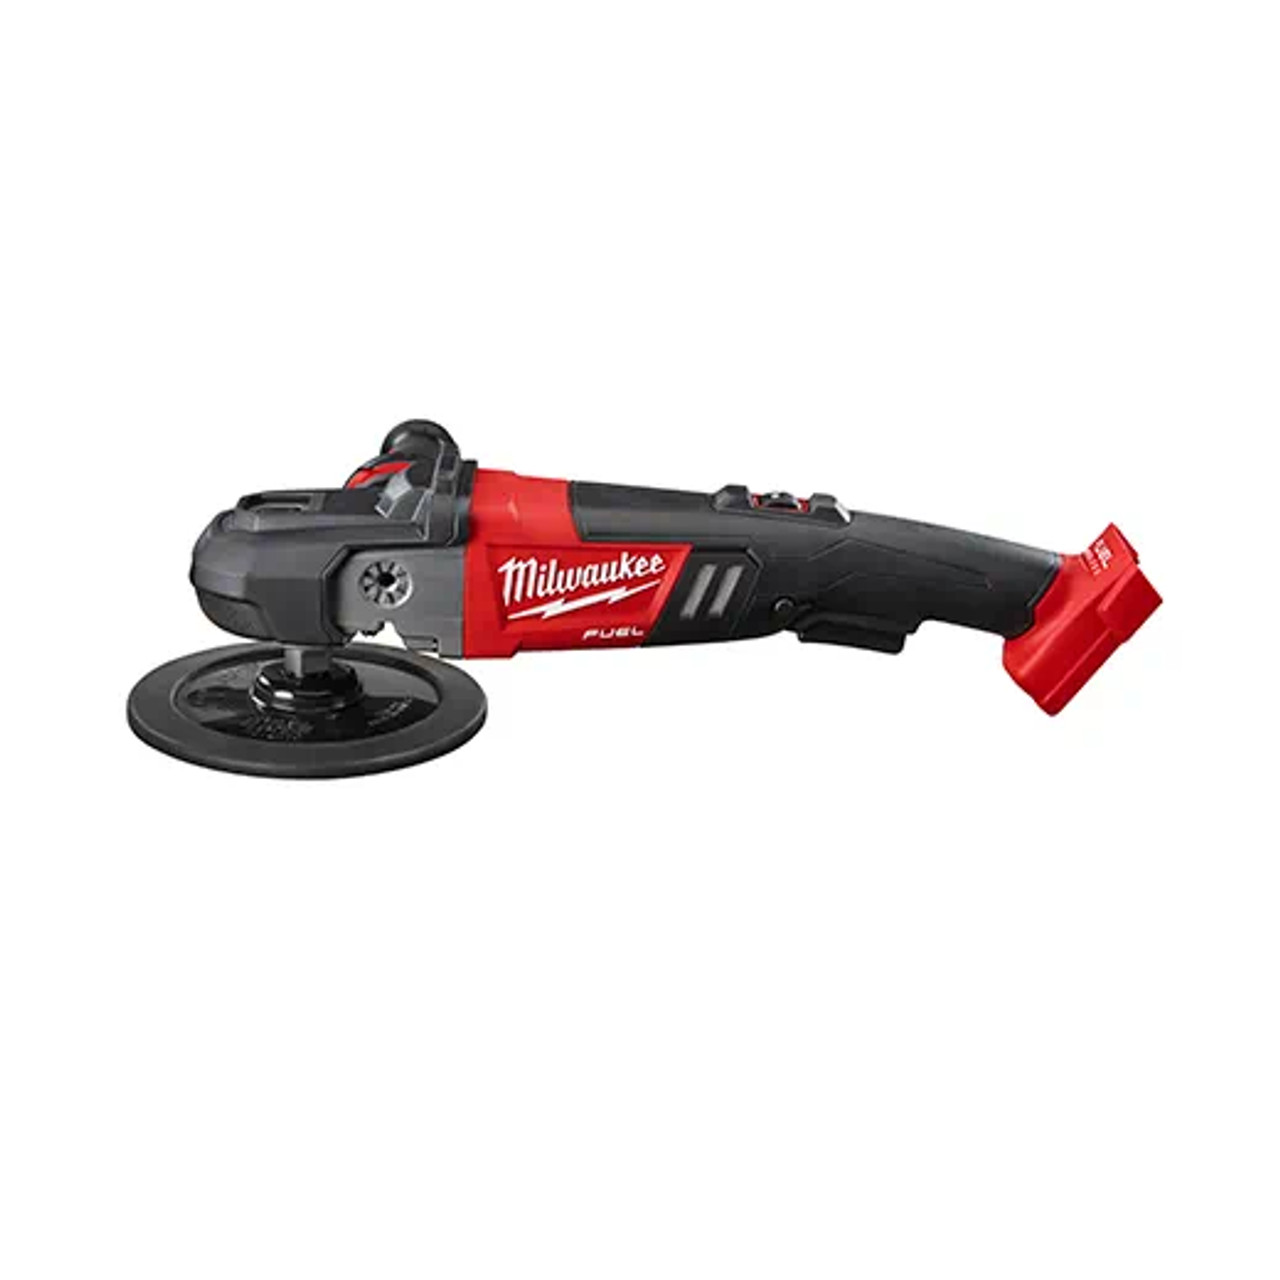 M18 FUEL? 7? Variable Speed Polisher (Tool Only)